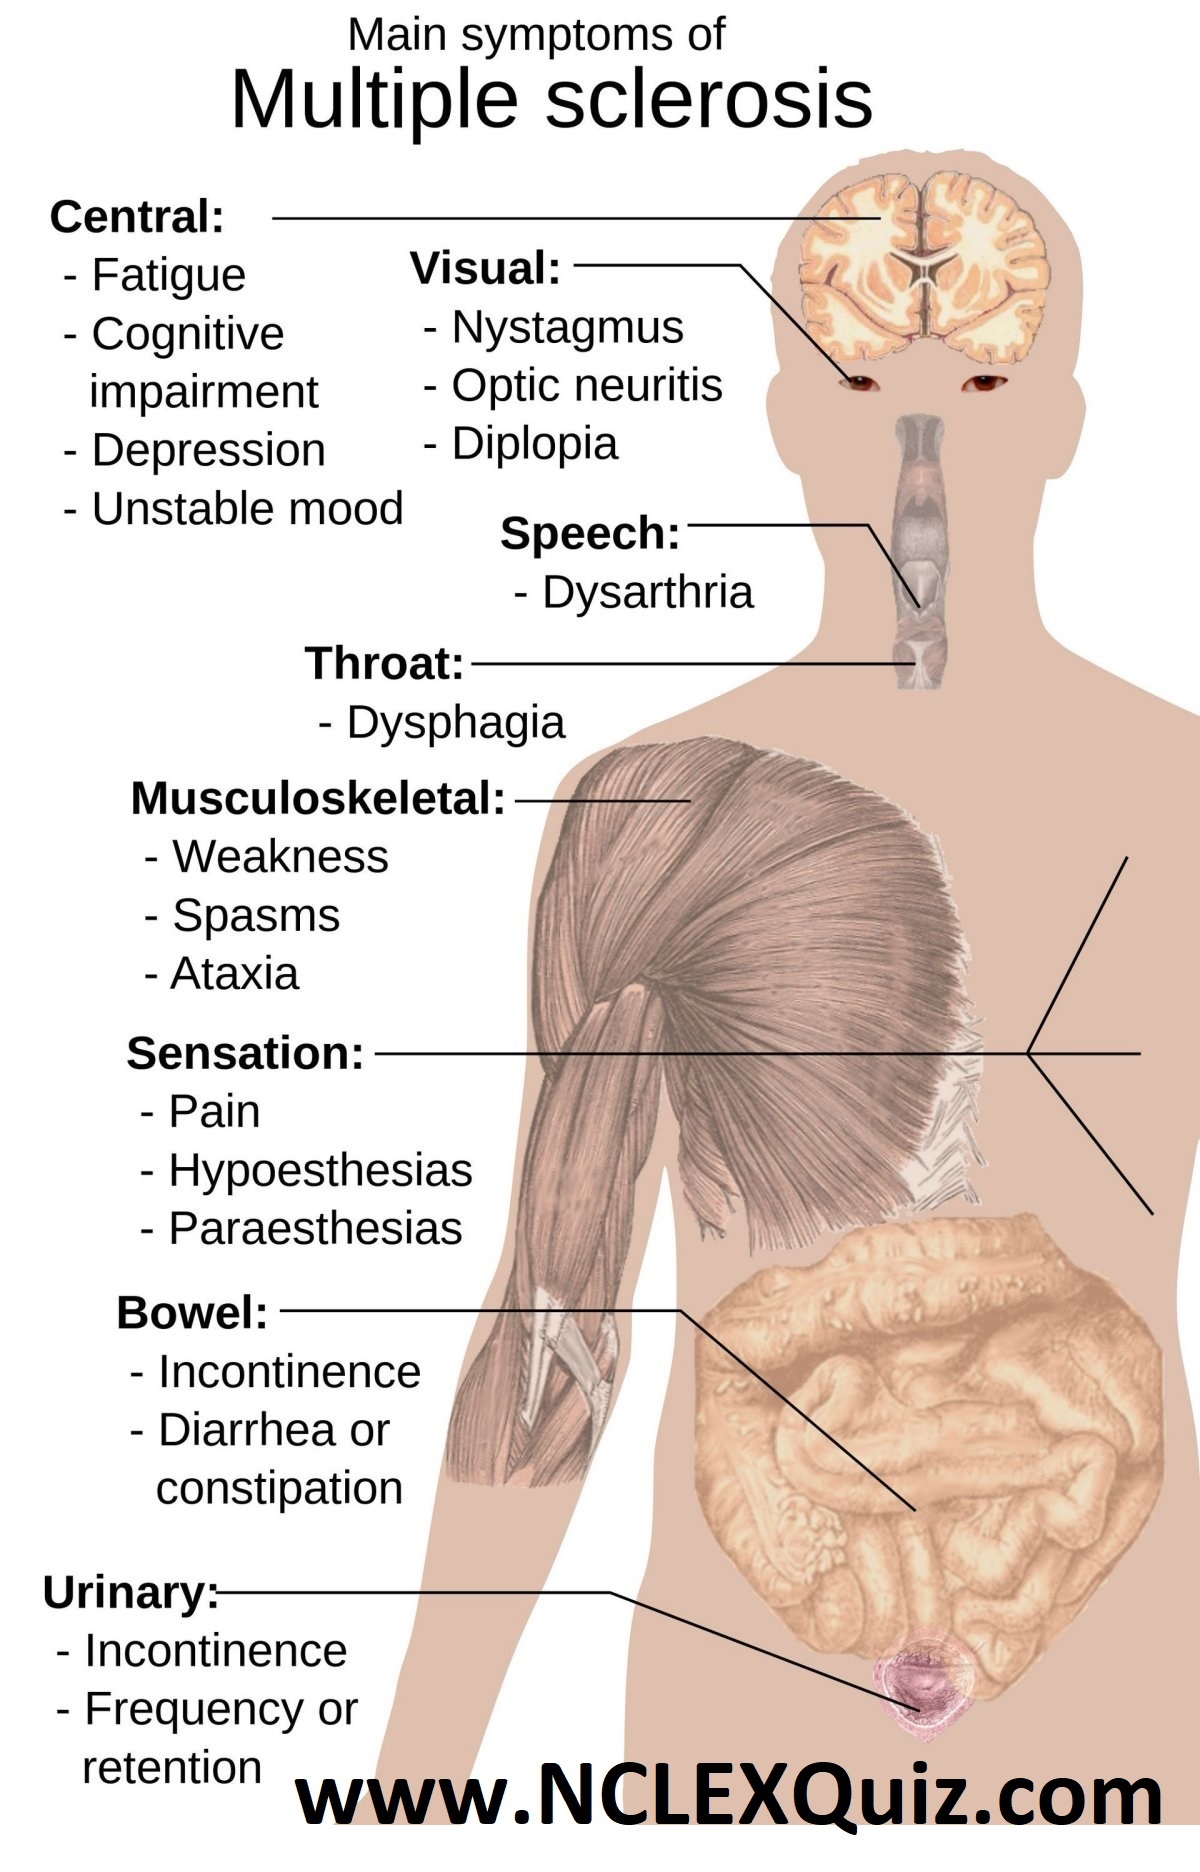 Multiple Sclerosis Nursing: Signs and Symptoms